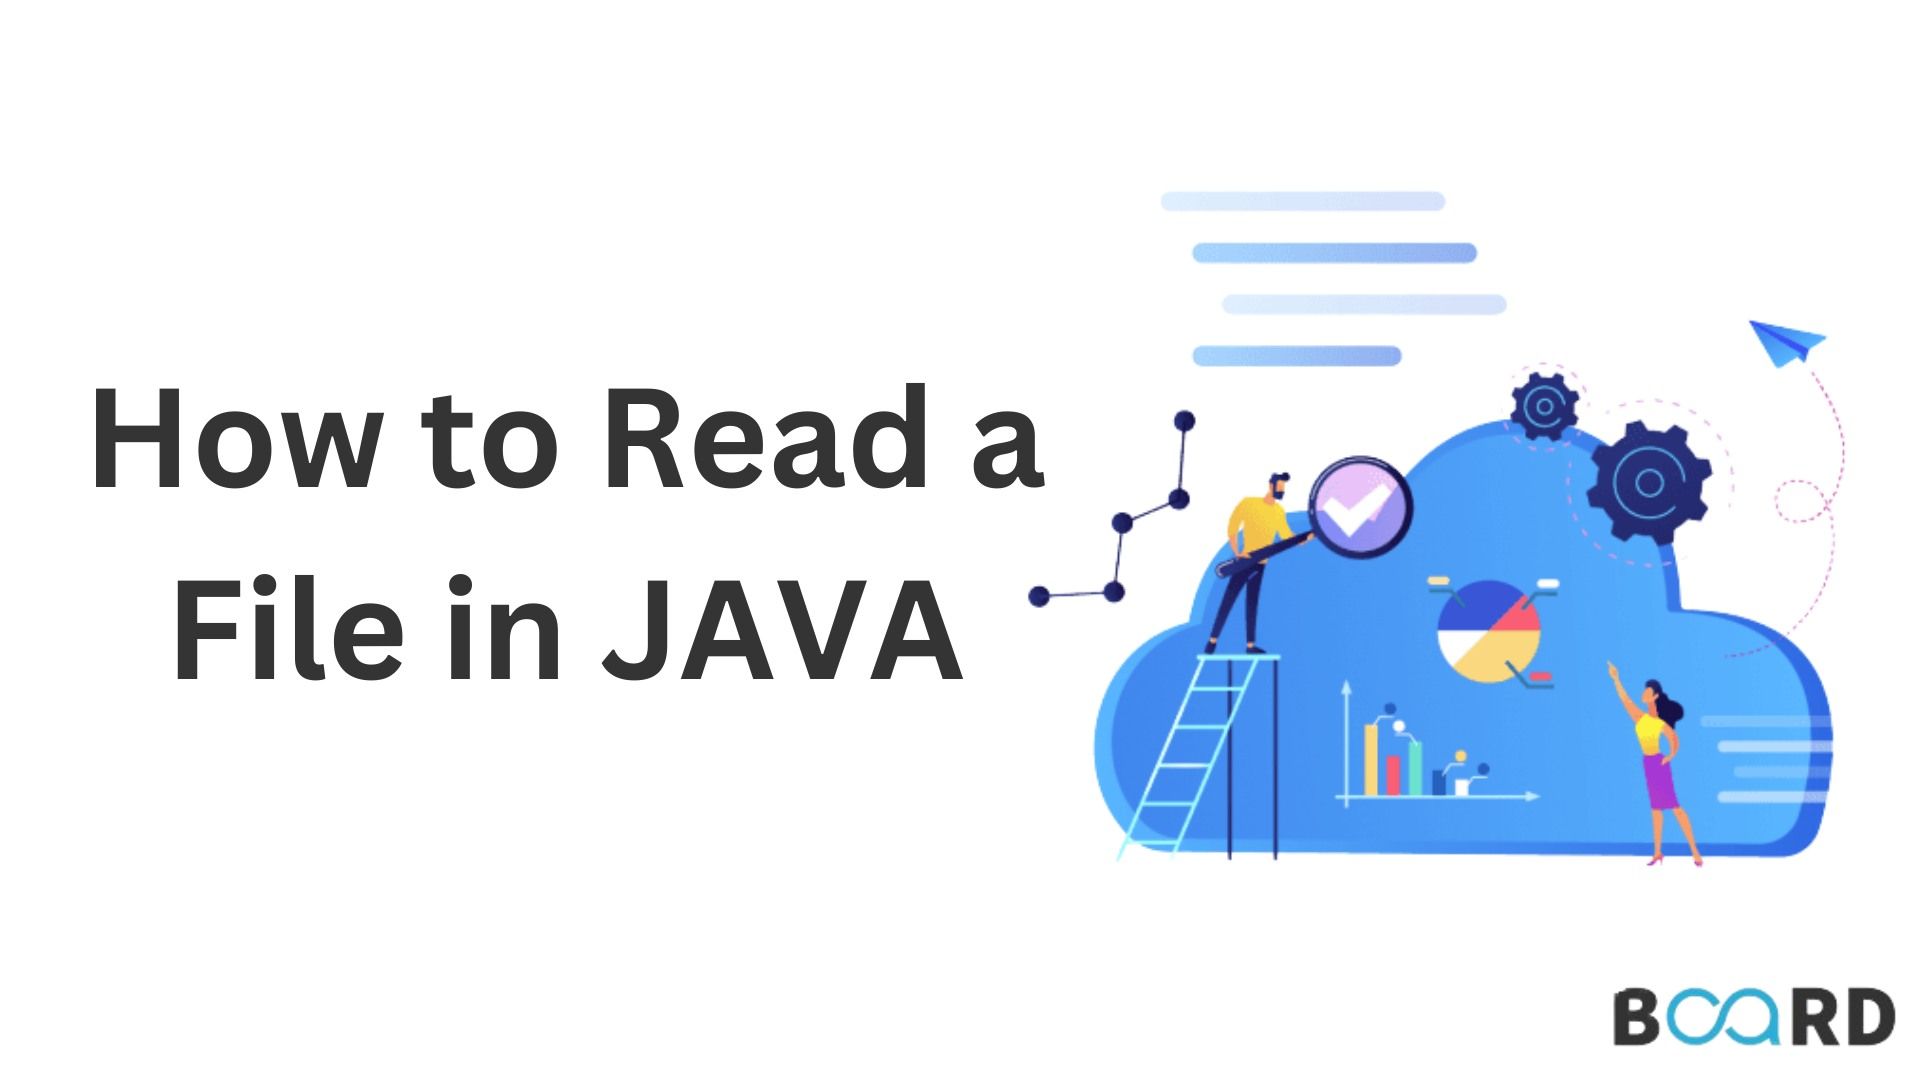 How to Read a File in JAVA?